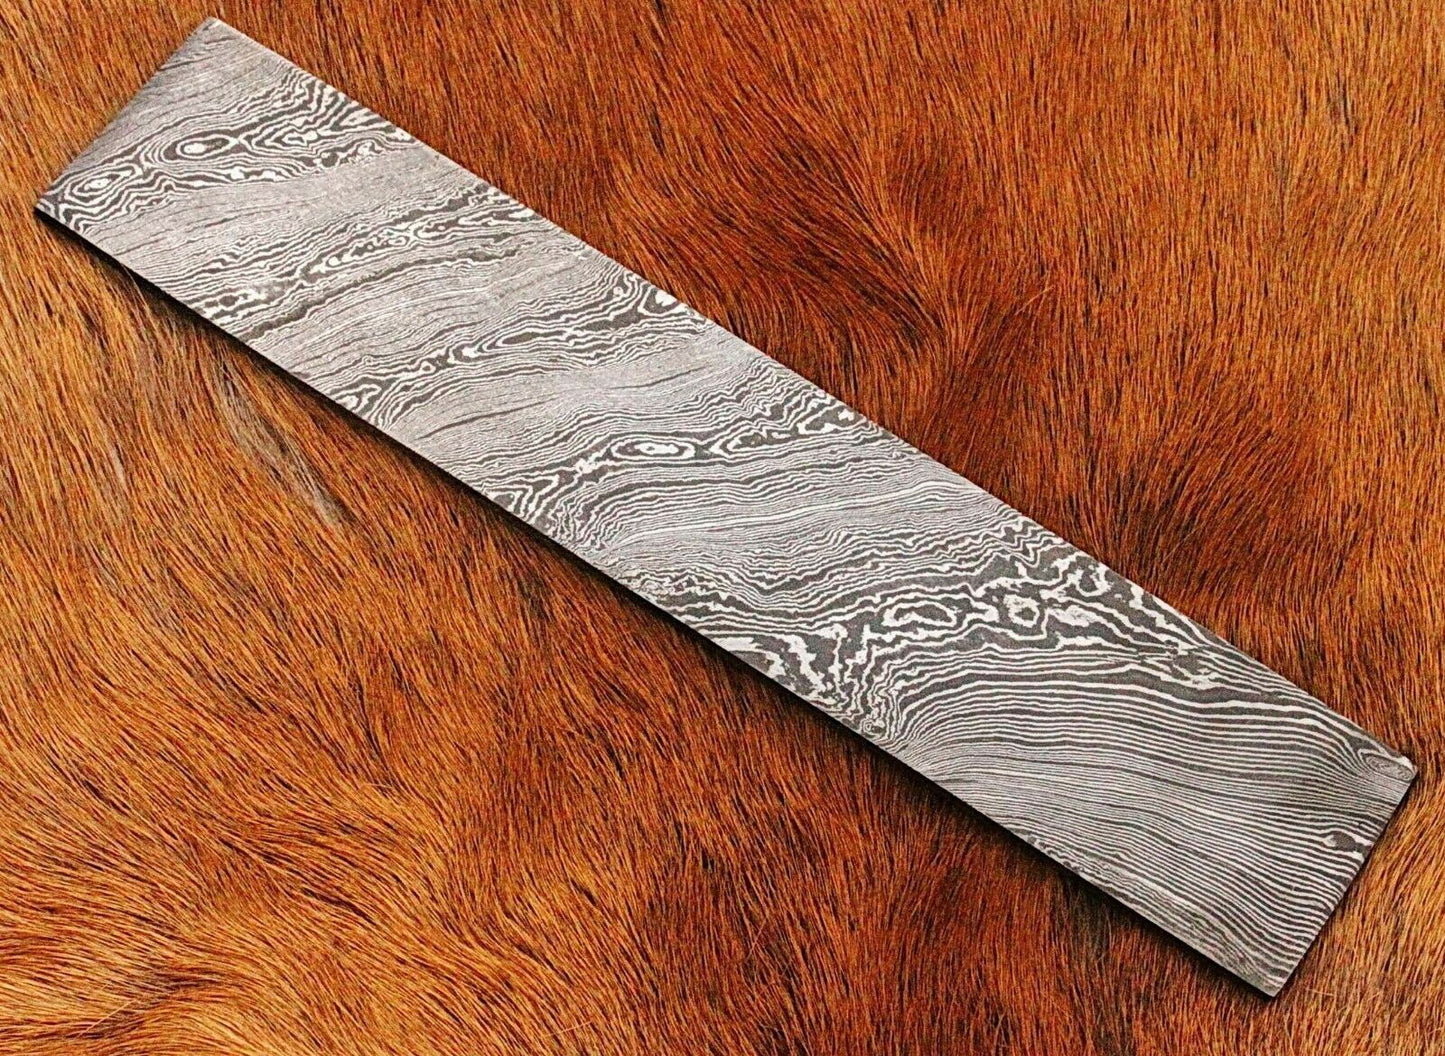 10" Hand Forged Damascus Steel Billet Bar/Bar For Knife Making  "Twisted Pattern"